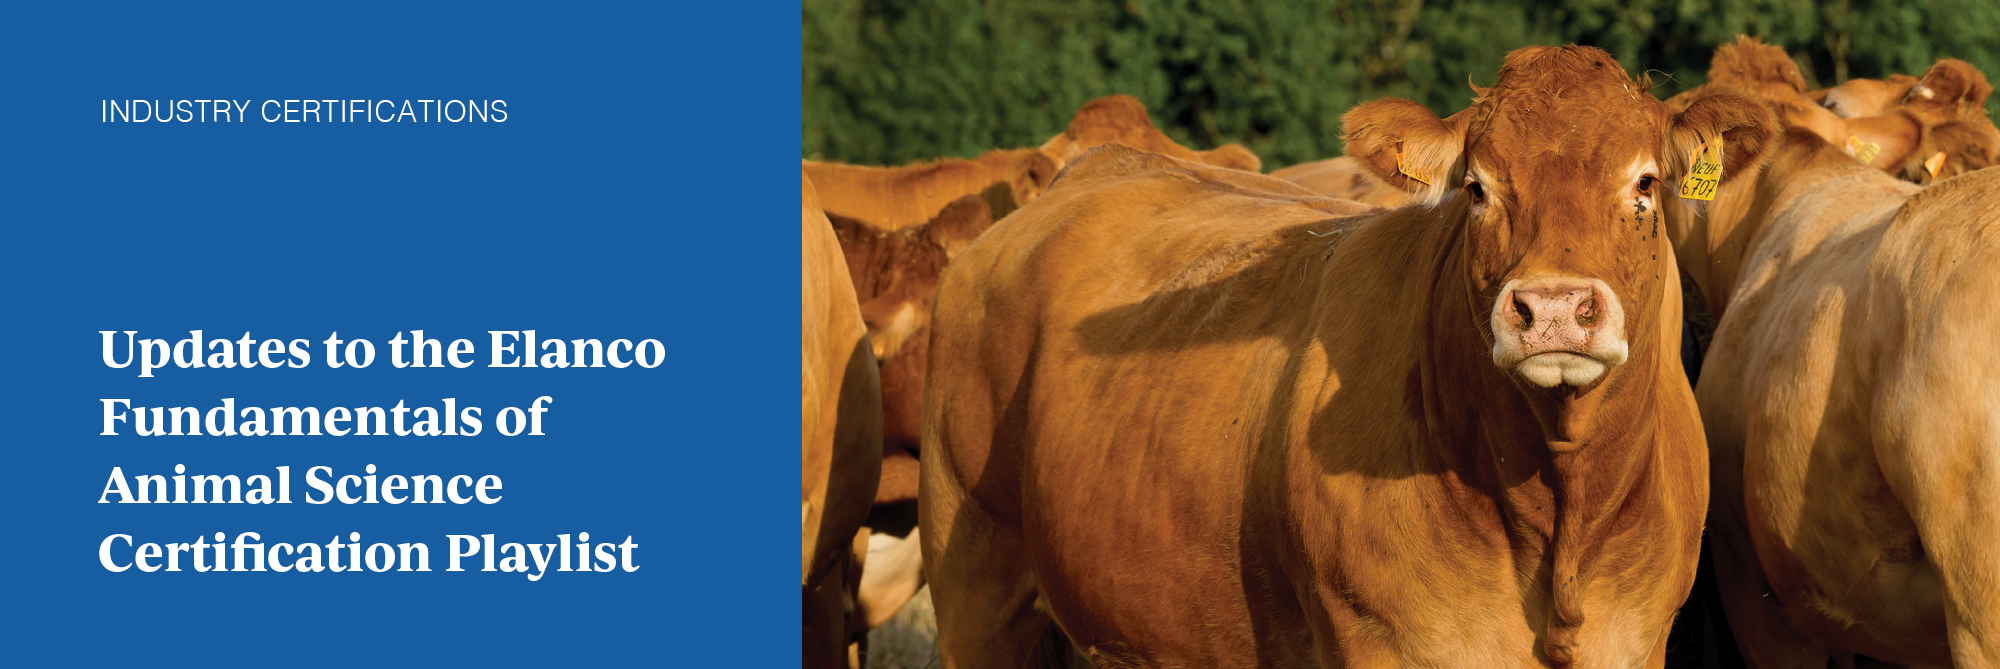 Updates to the Elanco Fundamentals of Animal Science Certification Playlist